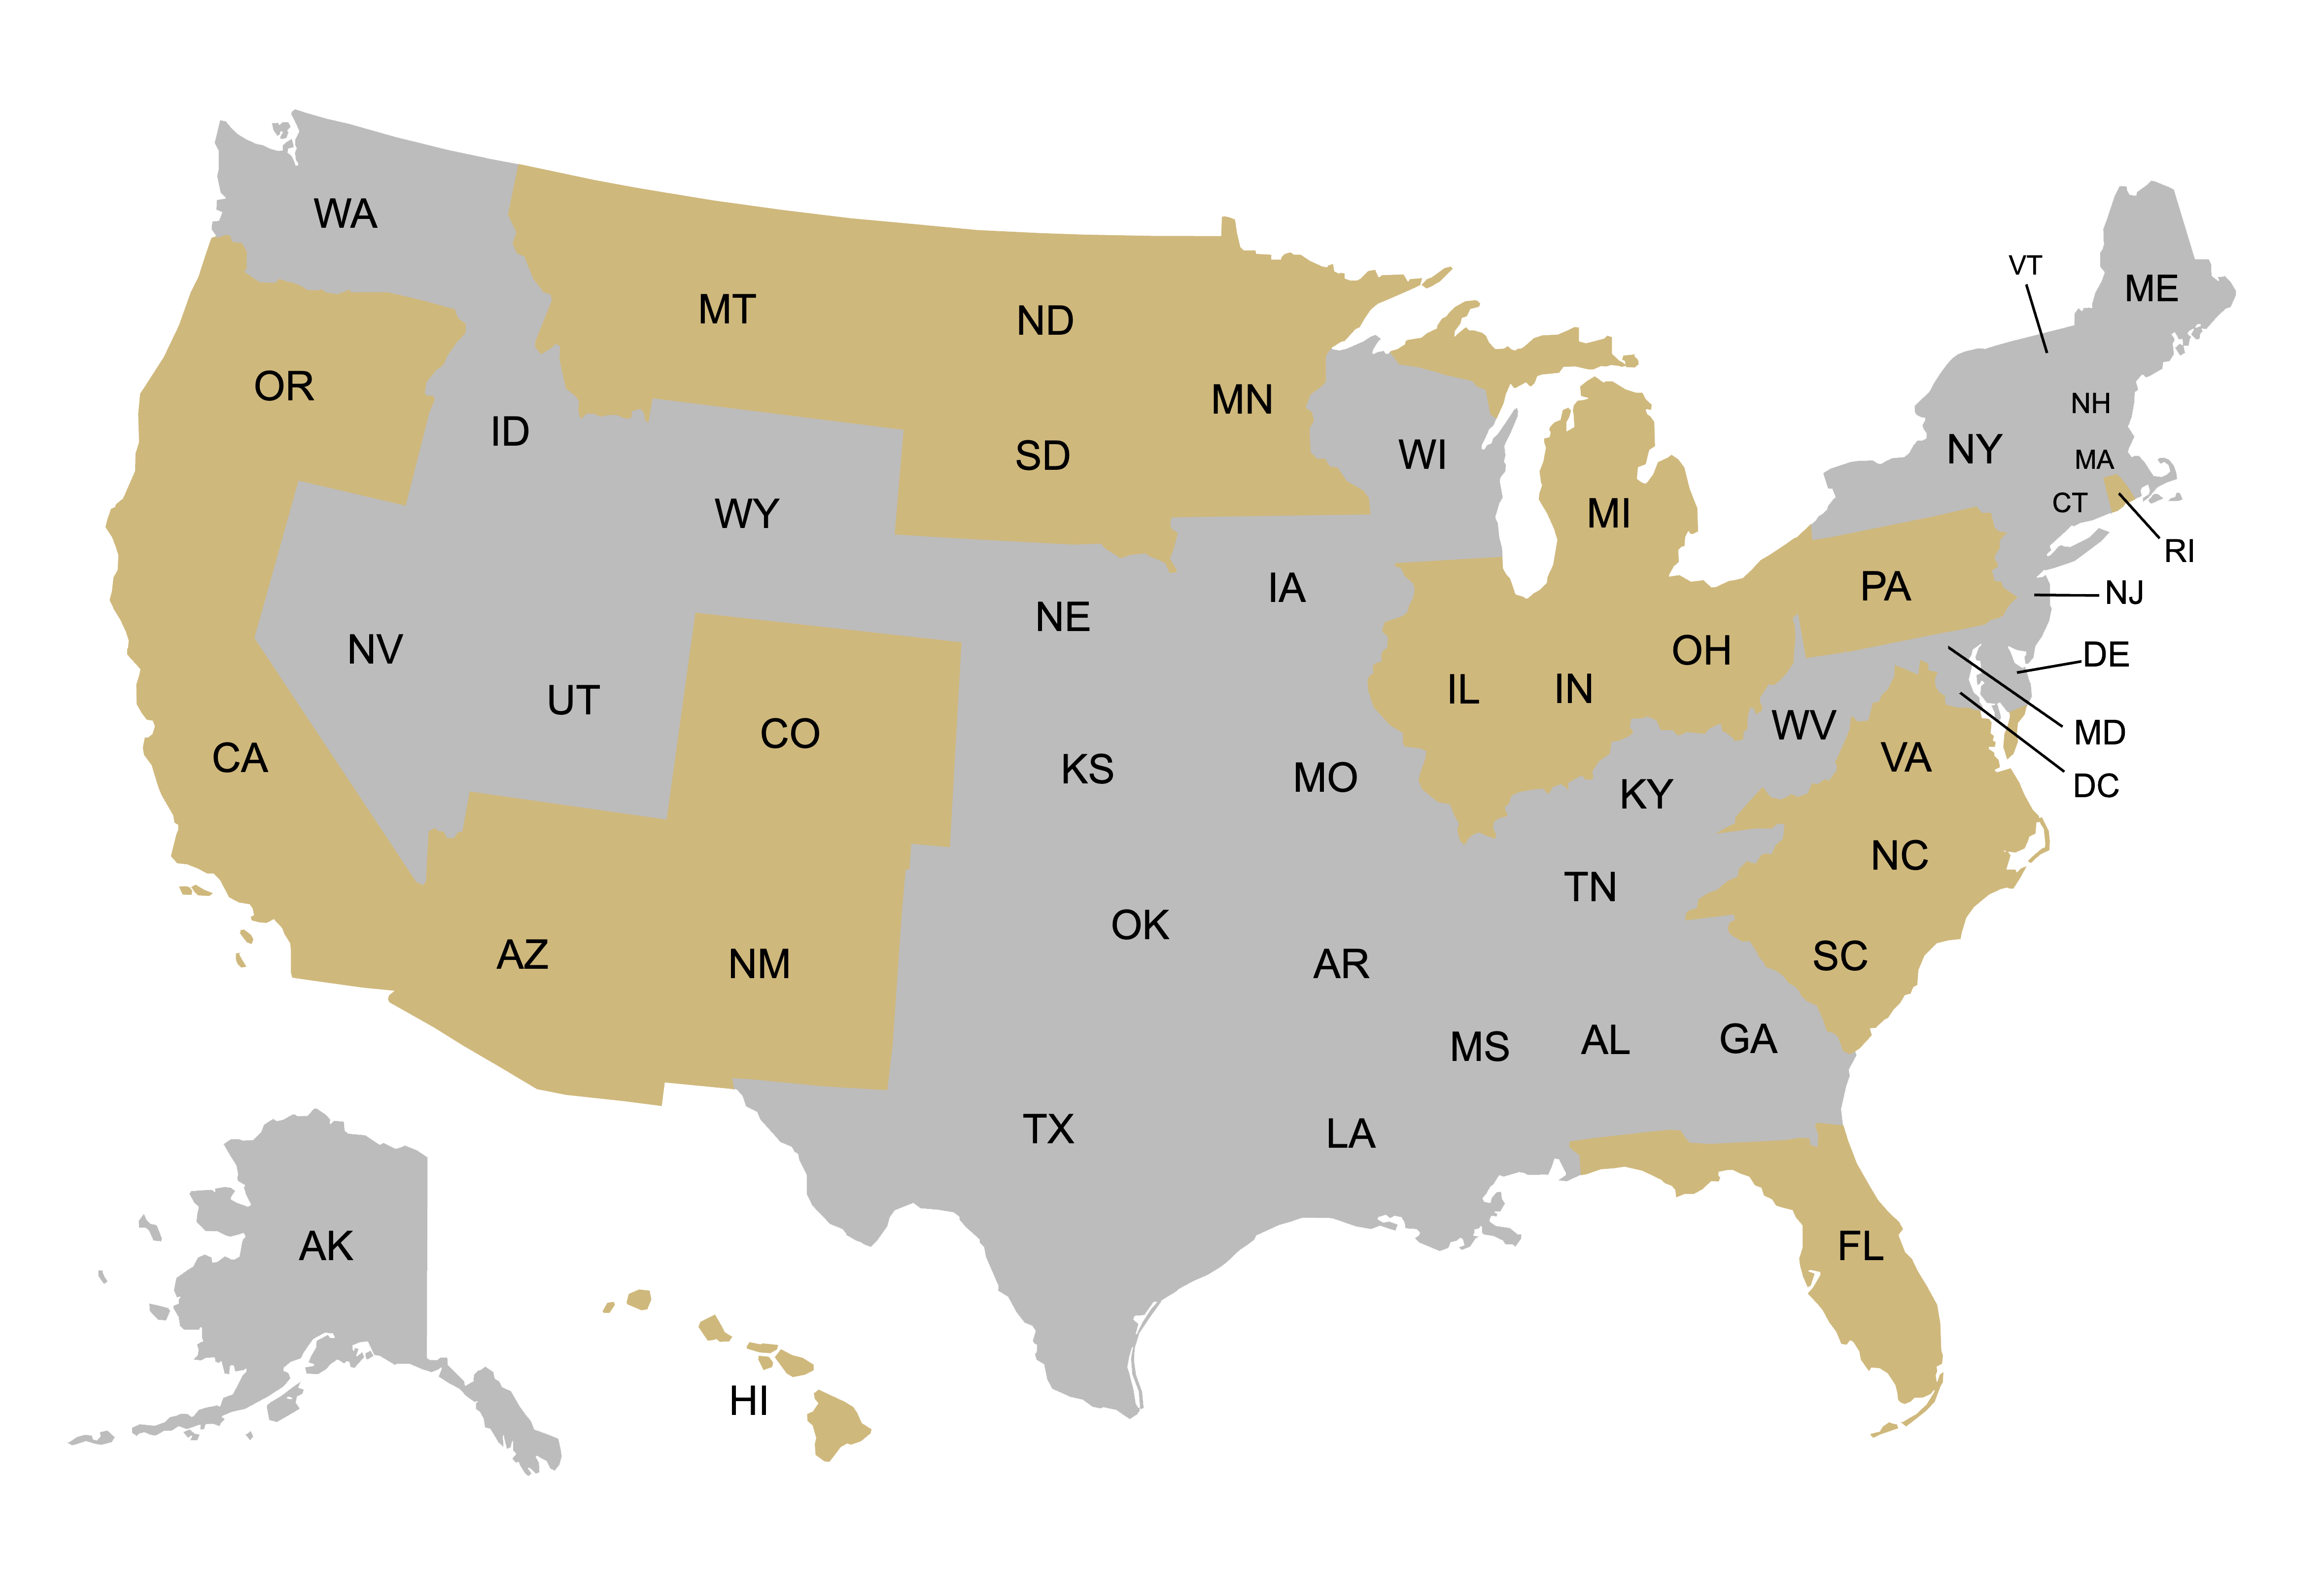 Map of the US with states colored